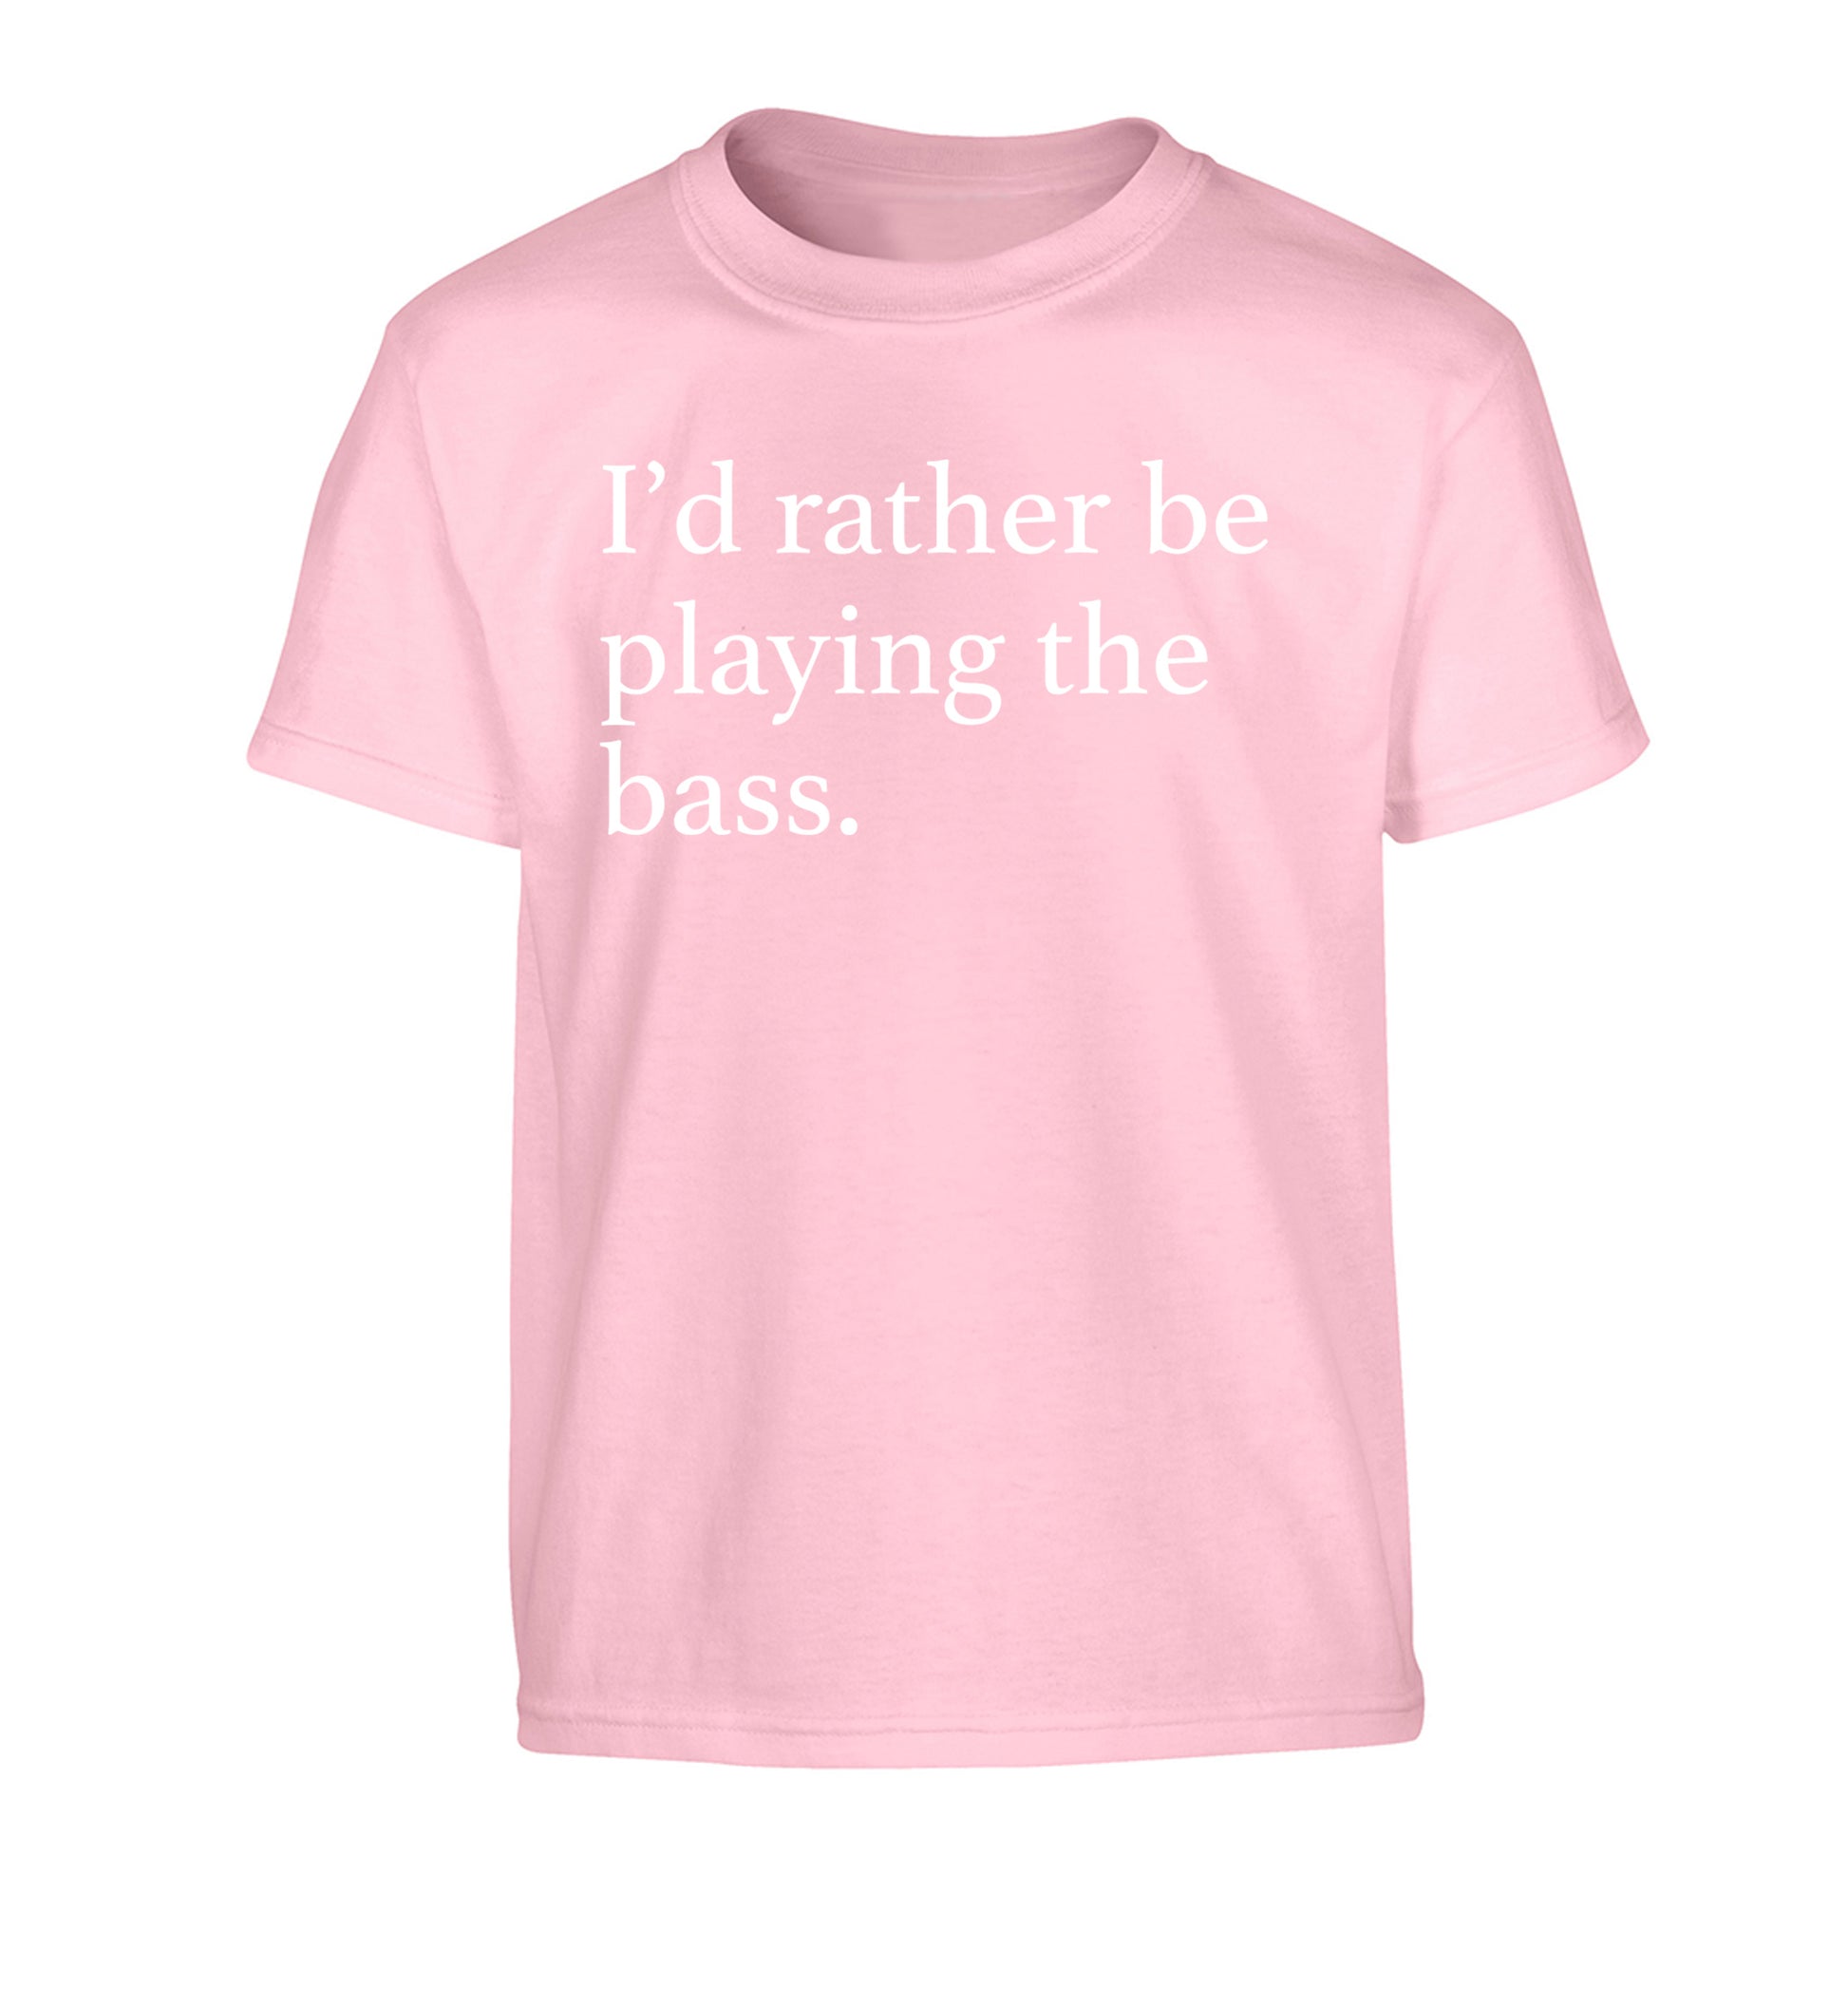 I'd rather by playing the bass Children's light pink Tshirt 12-14 Years